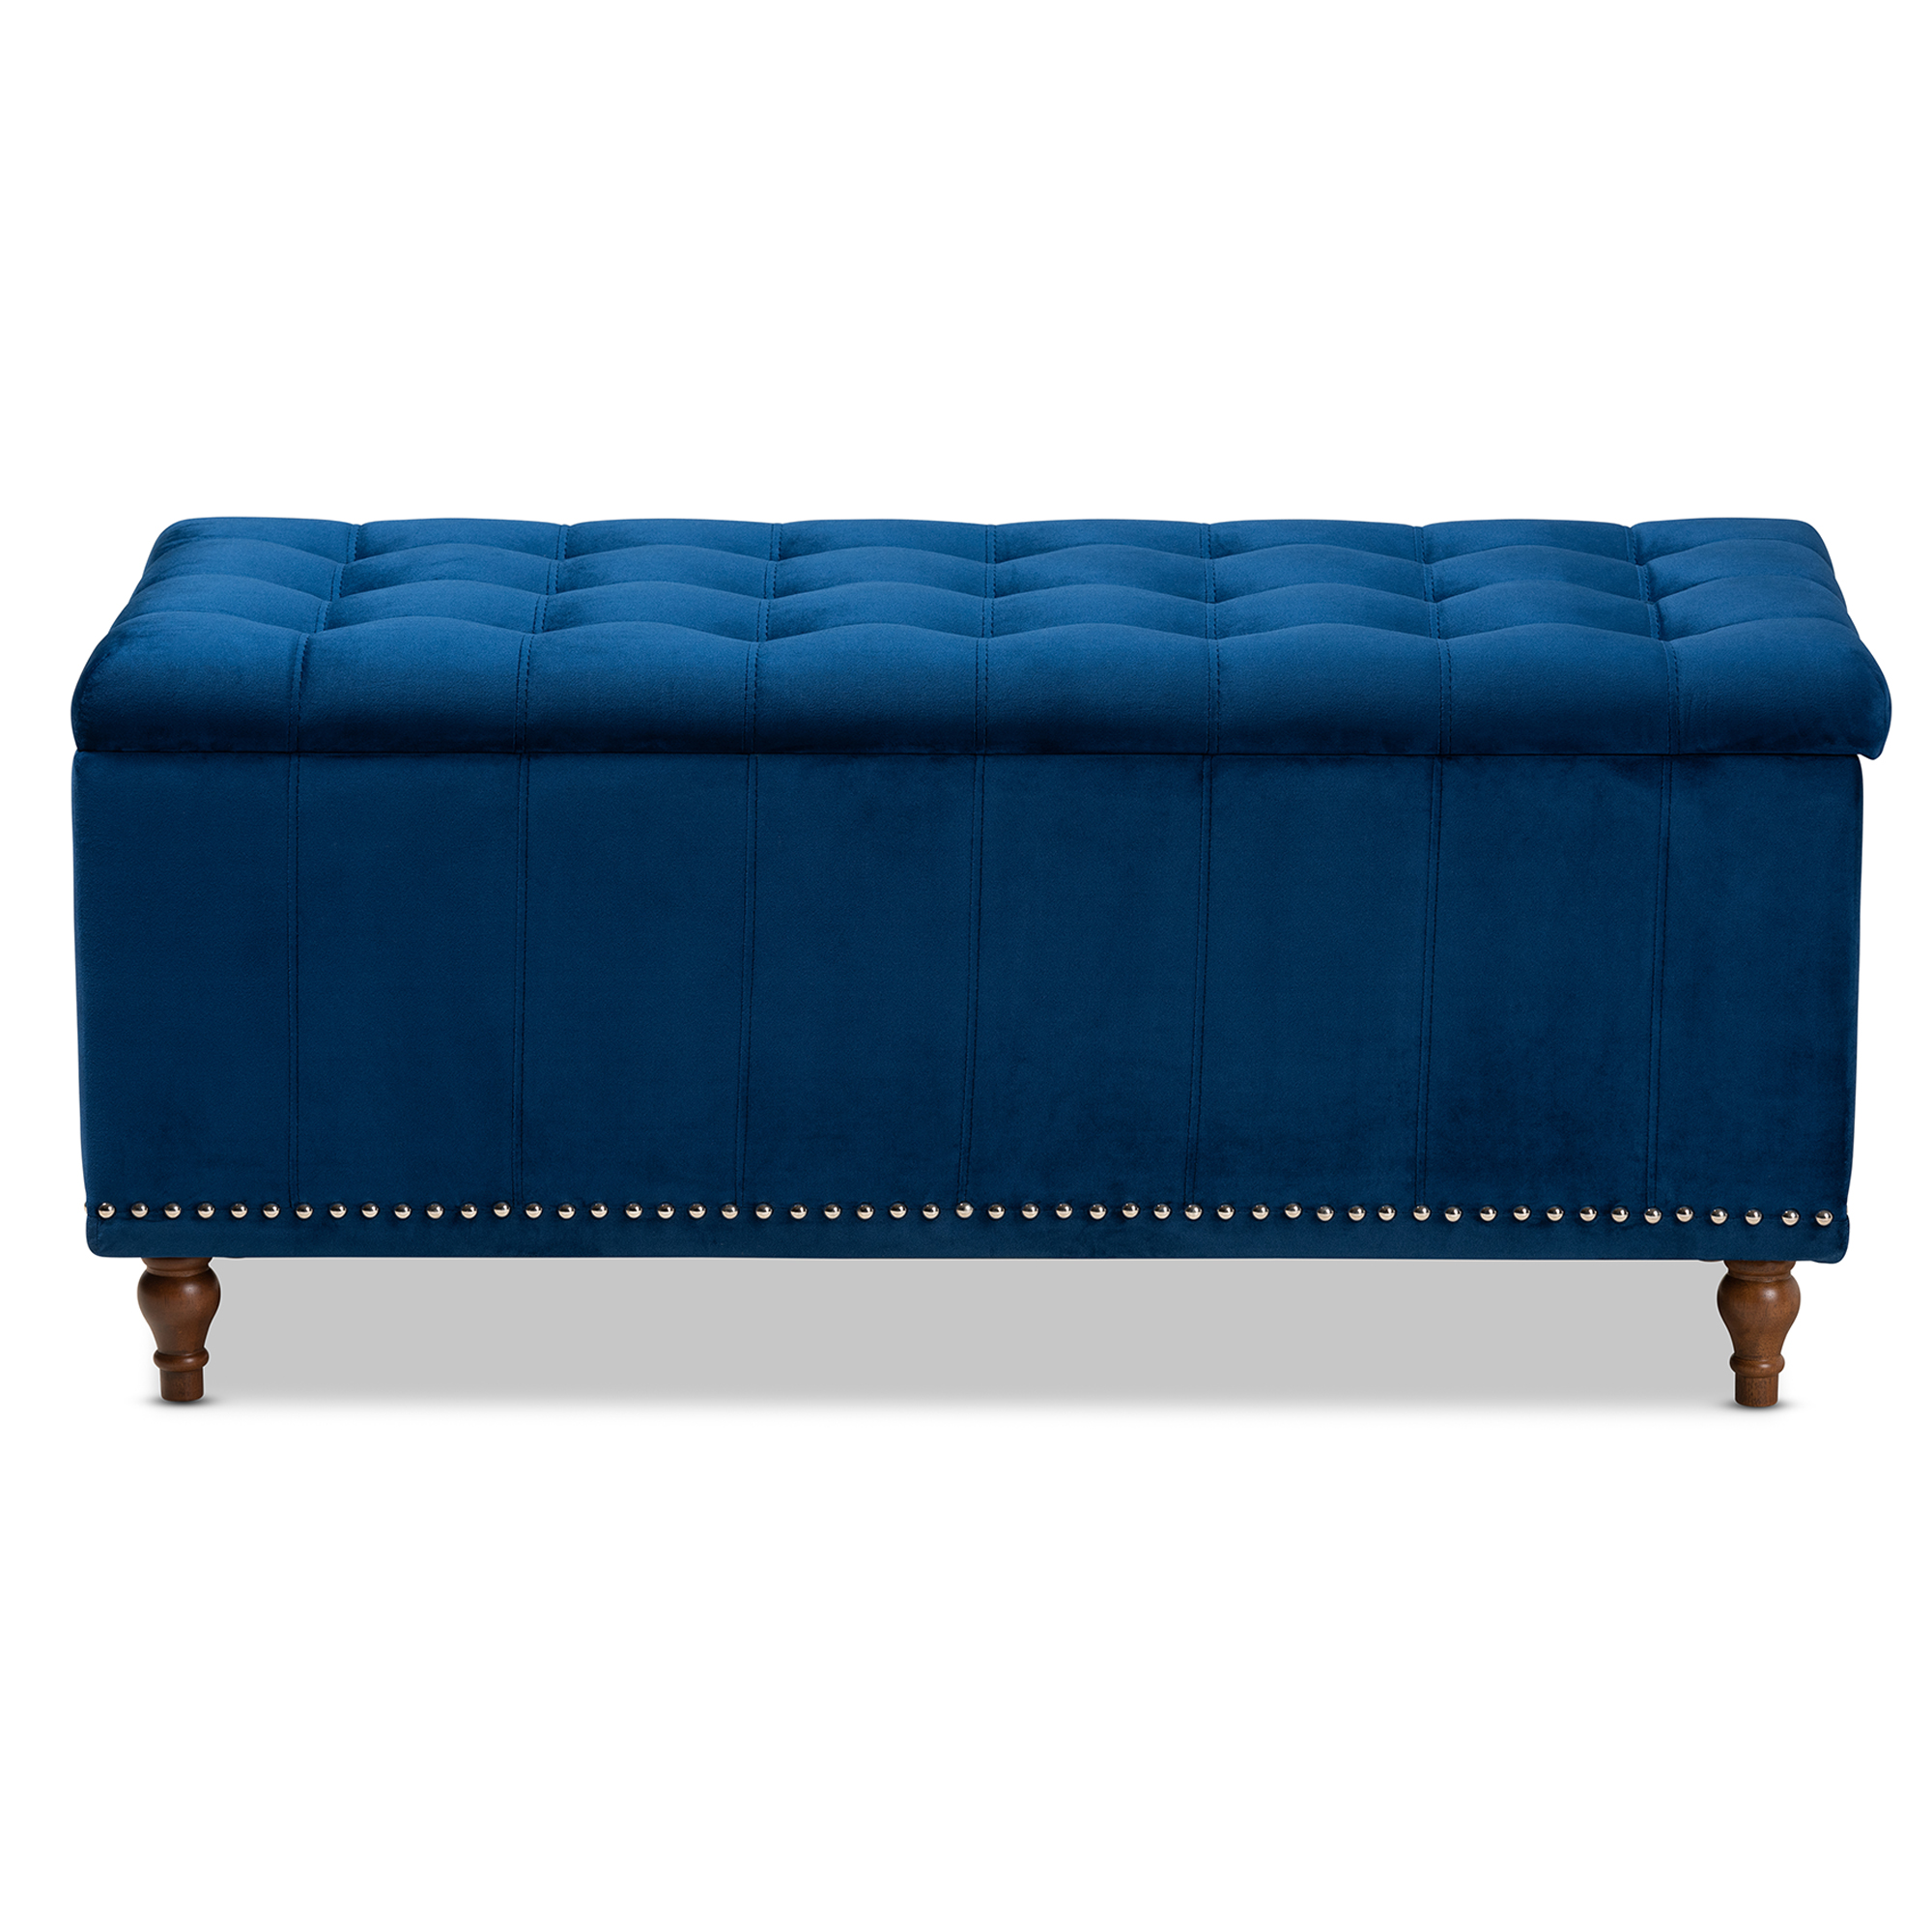 Baxton Studio Kaylee Modern and Contemporary Navy Blue Velvet Fabric Upholstered Button-Tufted Storage Ottoman Bench - image 4 of 11